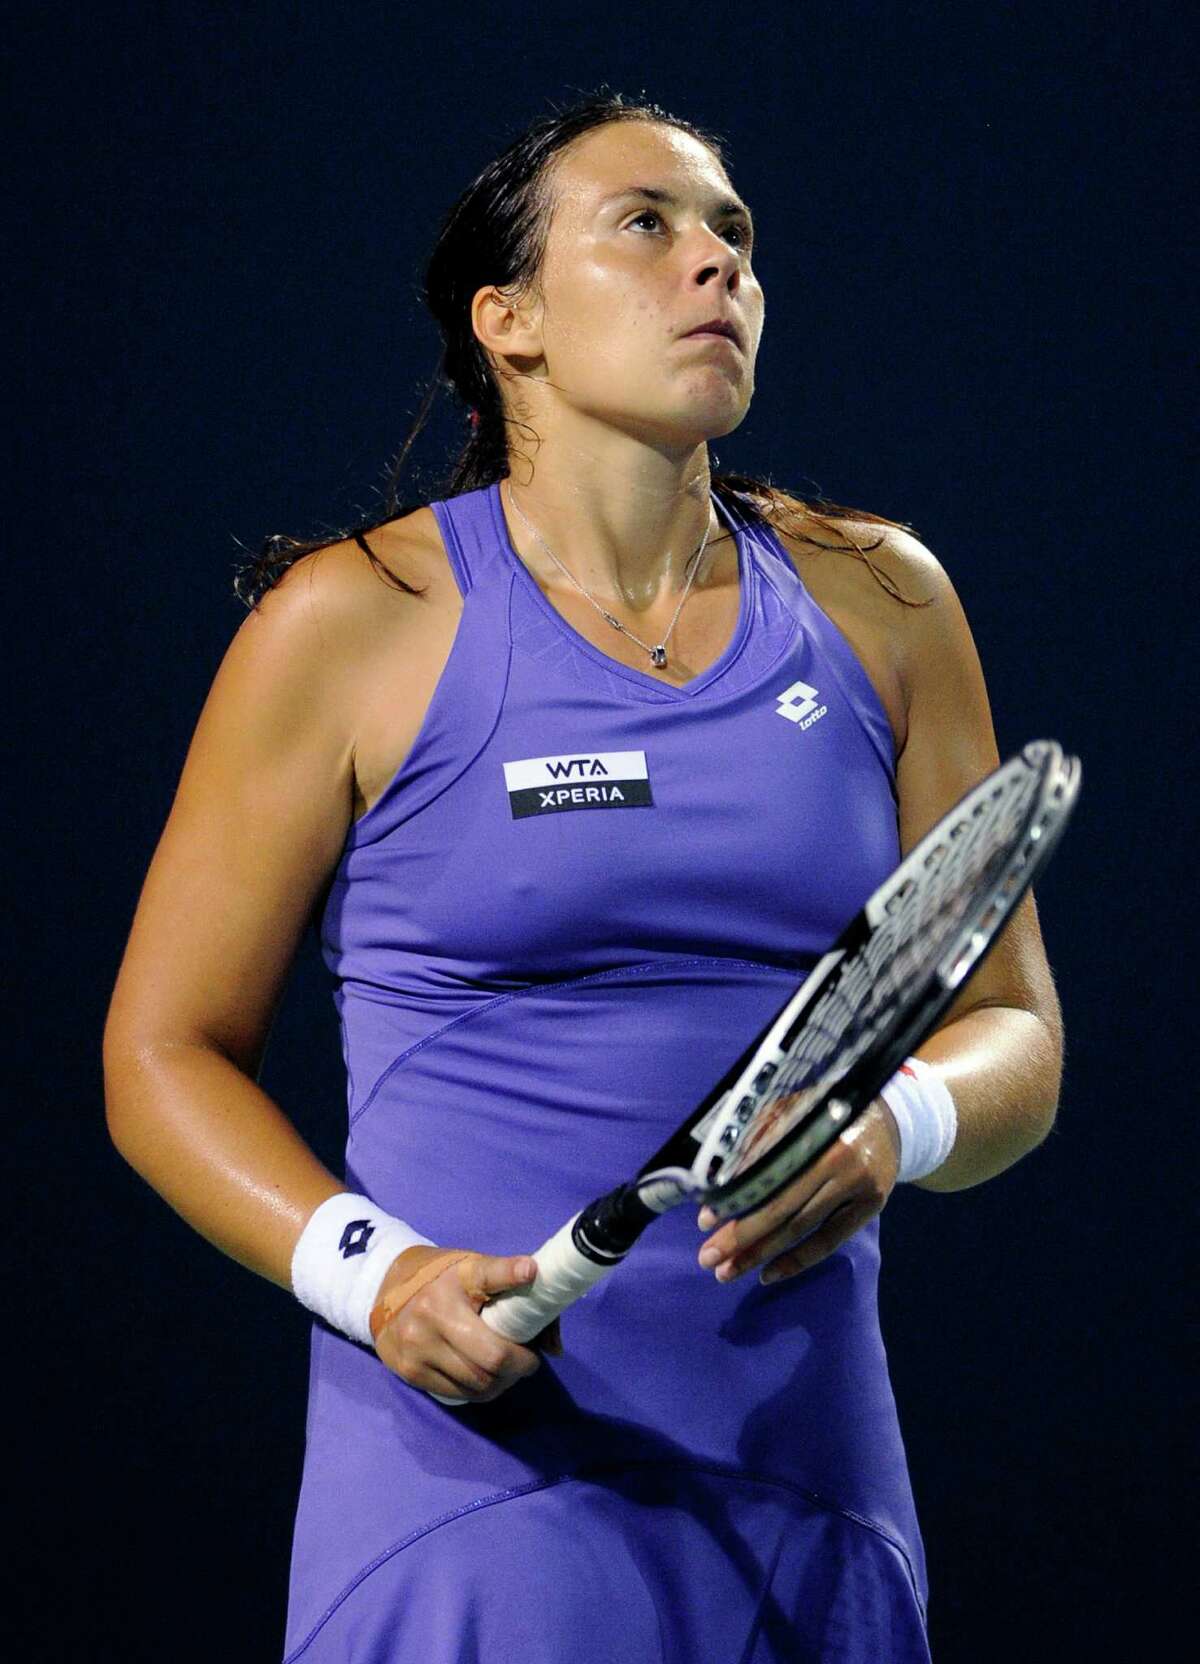 Marion Bartoli, of France, reacts after losing a point in her 6-4, 6-3 loss to Sara Errani, of Italy, during a quarterfinal at the New Haven Open tennis tournament in New Haven, Conn., on Thursday, Aug. 23, 2012. (AP Photo/Fred Beckham)